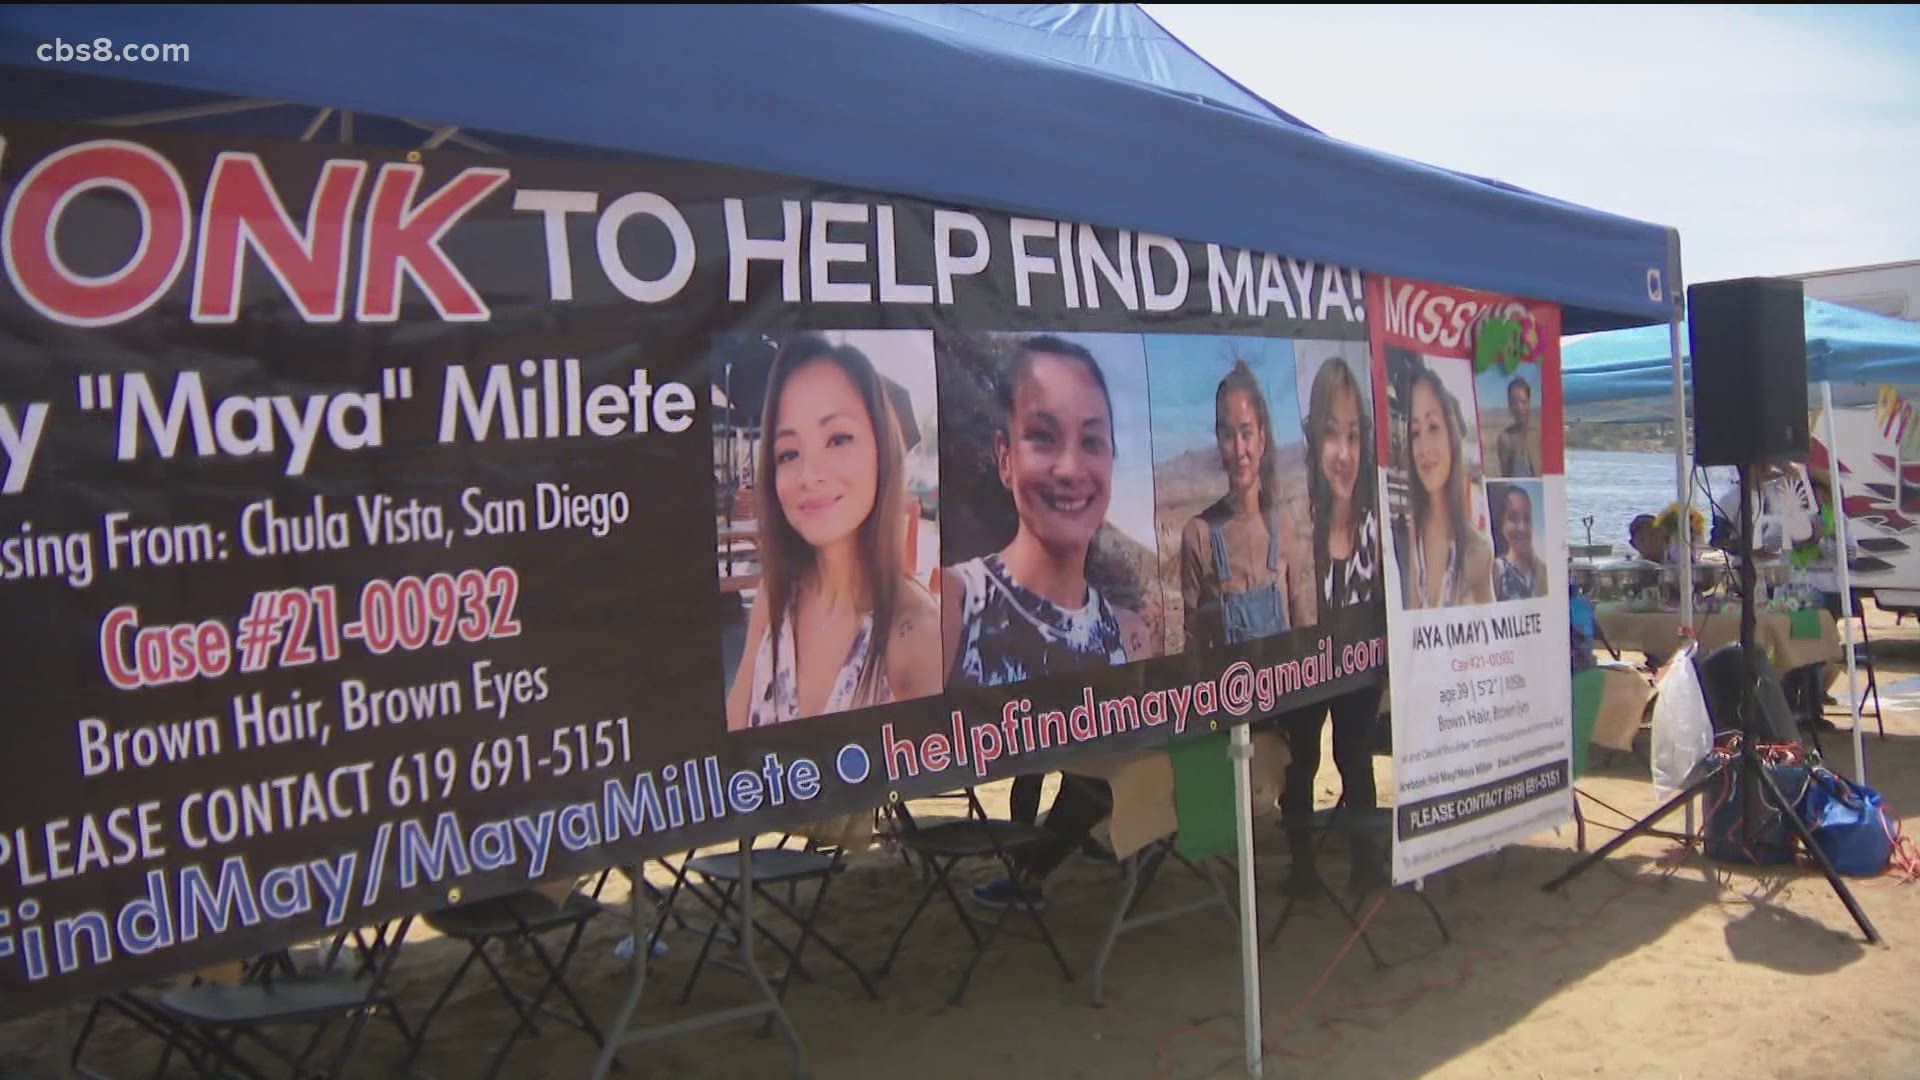 On Saturday, the family put the search on hold. May 1 was all about honoring Maya.